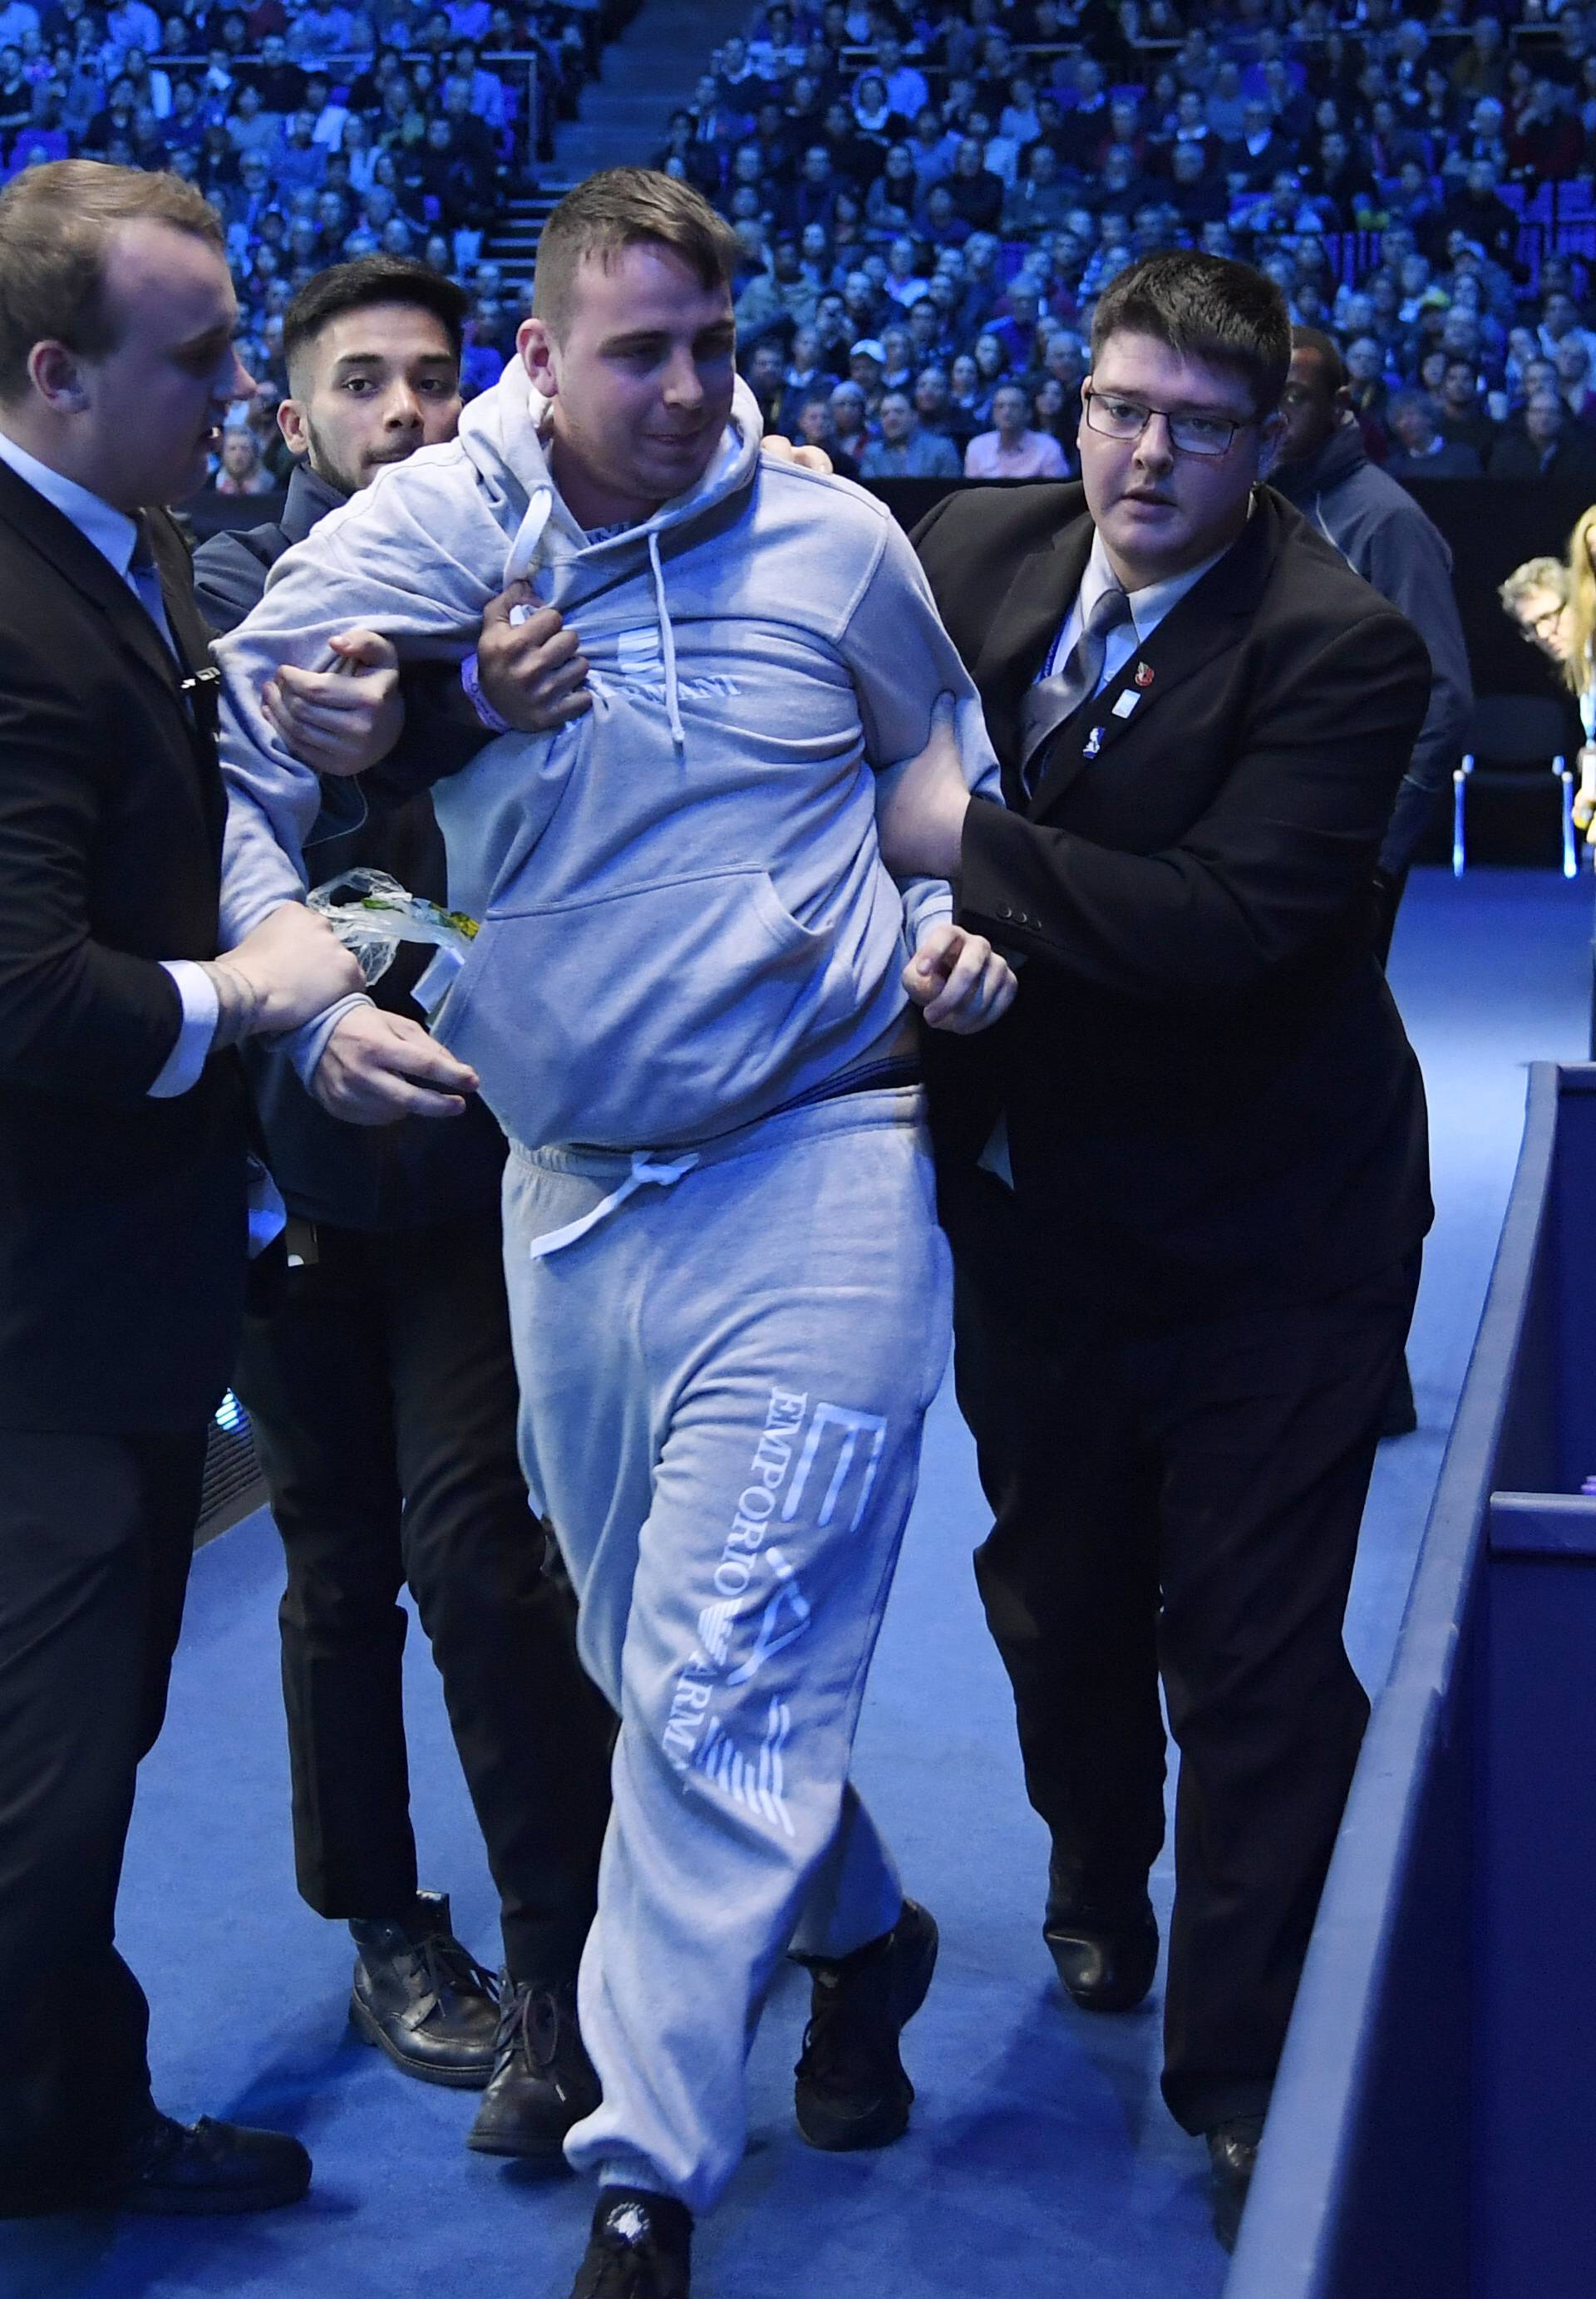 Security apprehend a spectator that attempted to invade the court during the semi final match between Japan's Kei Nishikori and Serbia's Novak Djokovic